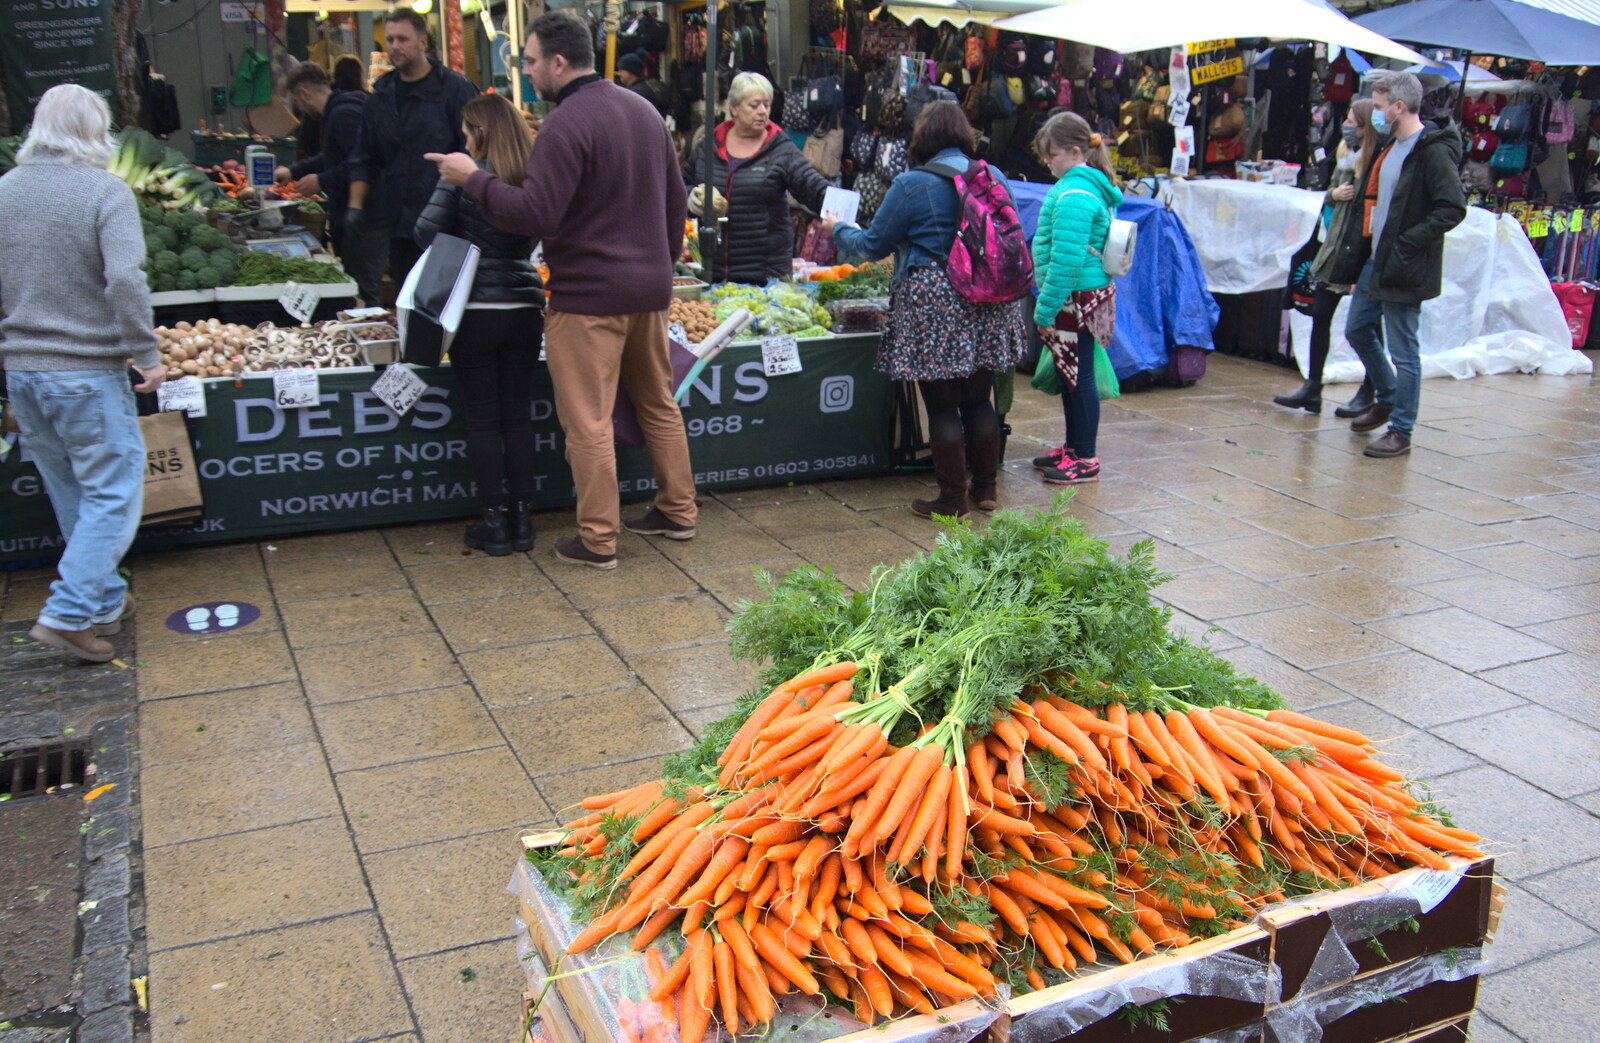 A bunch of carrots from A Bit of Christmas Shopping, Norwich, Norfolk - 23rd December 2020